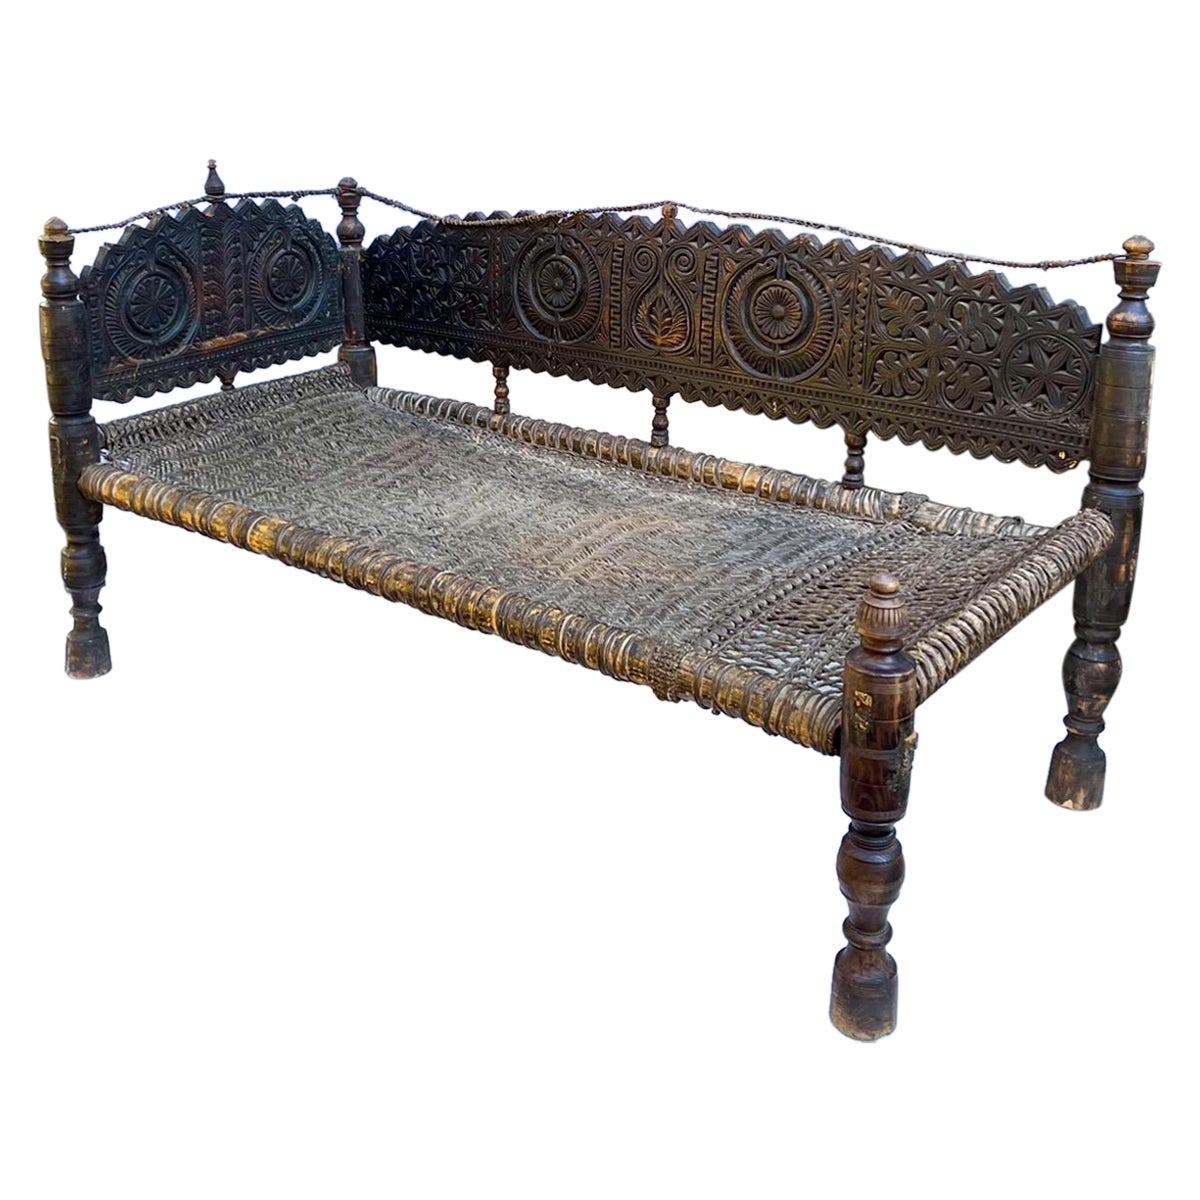 Early 19th-C. Rustic Moroccan Carved Wood and Wicker Daybed / Chaise / Sofa